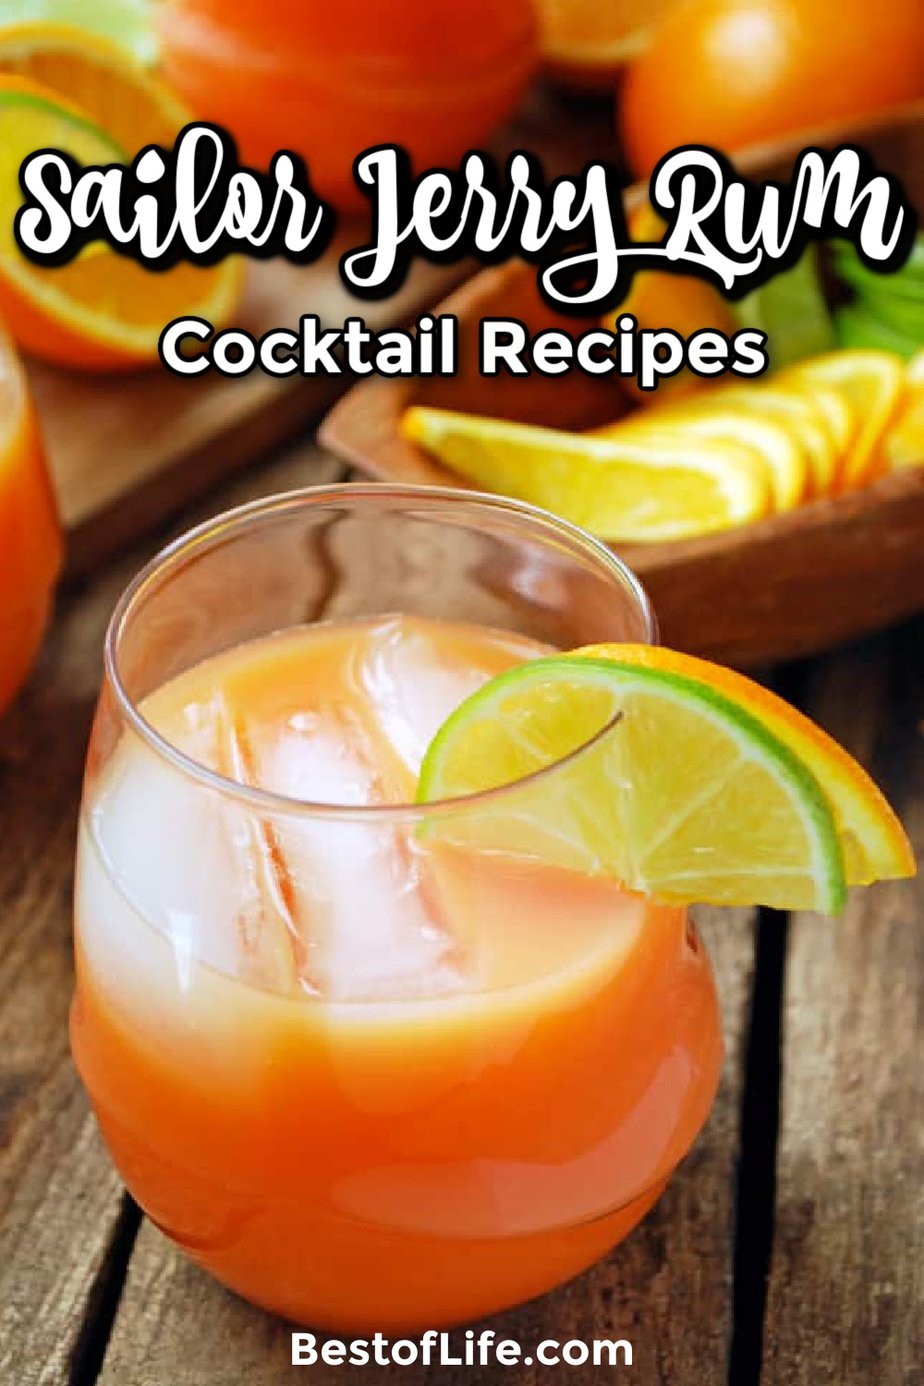 Here you have the best Sailor Jerry rum drinks that offer flavor and flare for a weeknight or weekend staple. Enjoy these best drinks with rum responsibly! Dark Rum Cocktails | Classic Rum Cocktails | White Rum Cocktails | Spiced Rum Cocktails | Summer Cocktails with Rum | Modern Cocktails with Rum | How to Make Cocktails with Dark Rum | Happy Hour Recipes with Rum #rum #cocktails